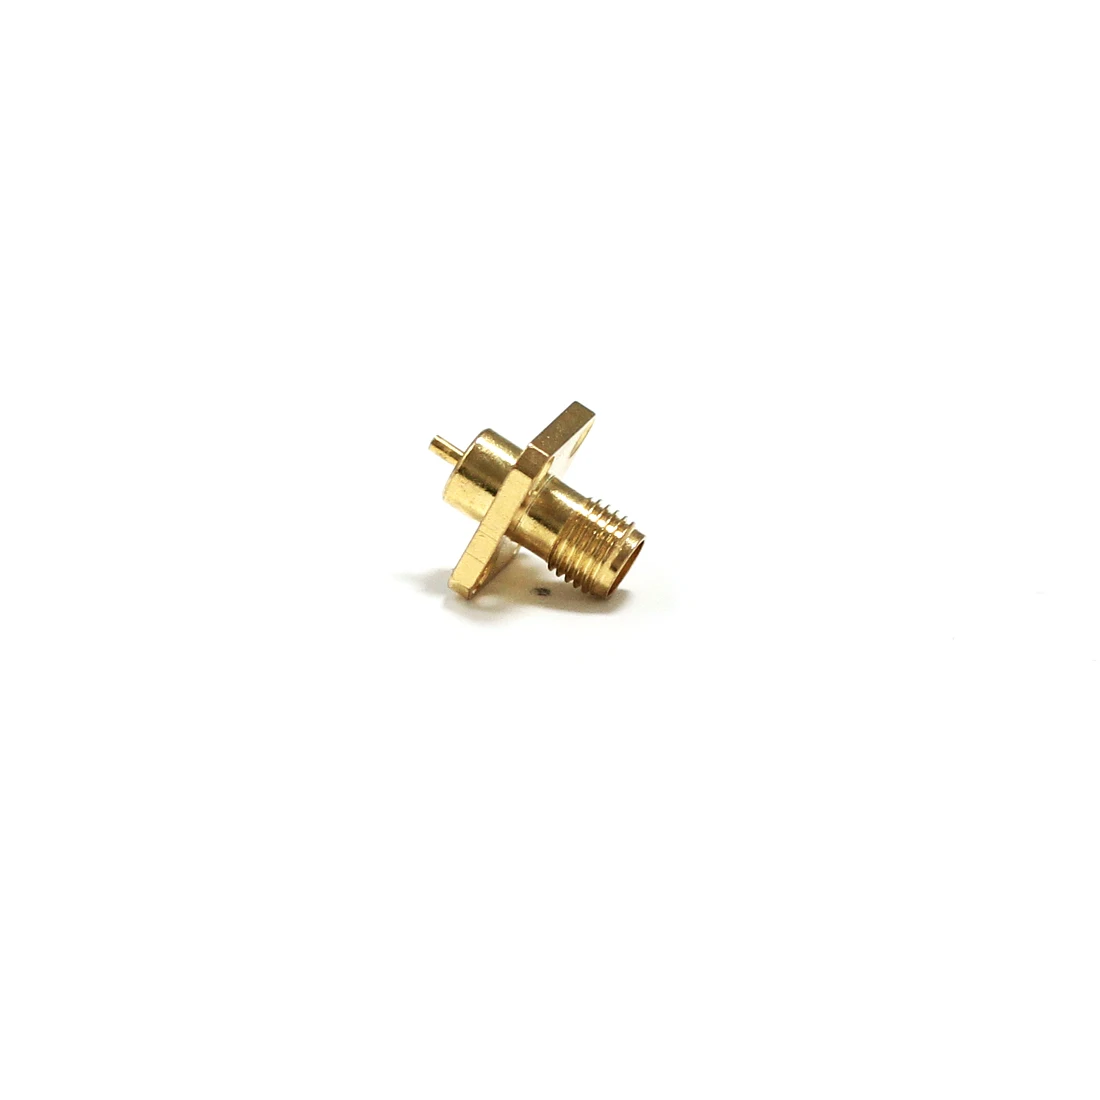 

1PC SMA Female Jack RF Coax Connector 4-hole flange solder post Straight Pillars Goldplated NEW wholesale